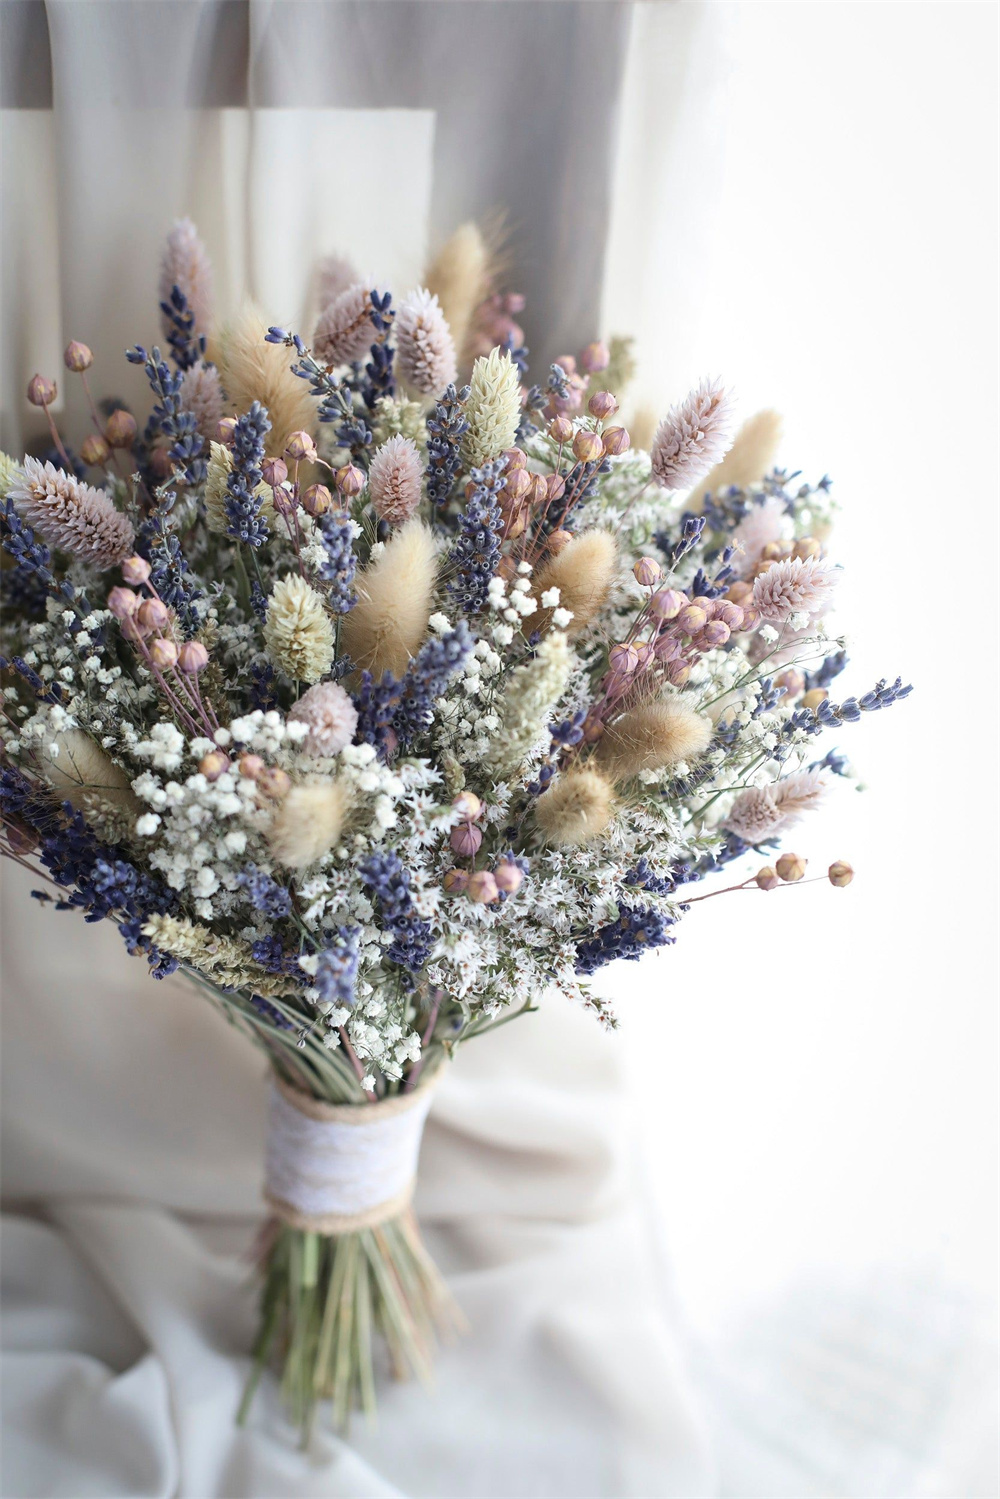 Enchanting Winter Wedding Bouquets with Lavender